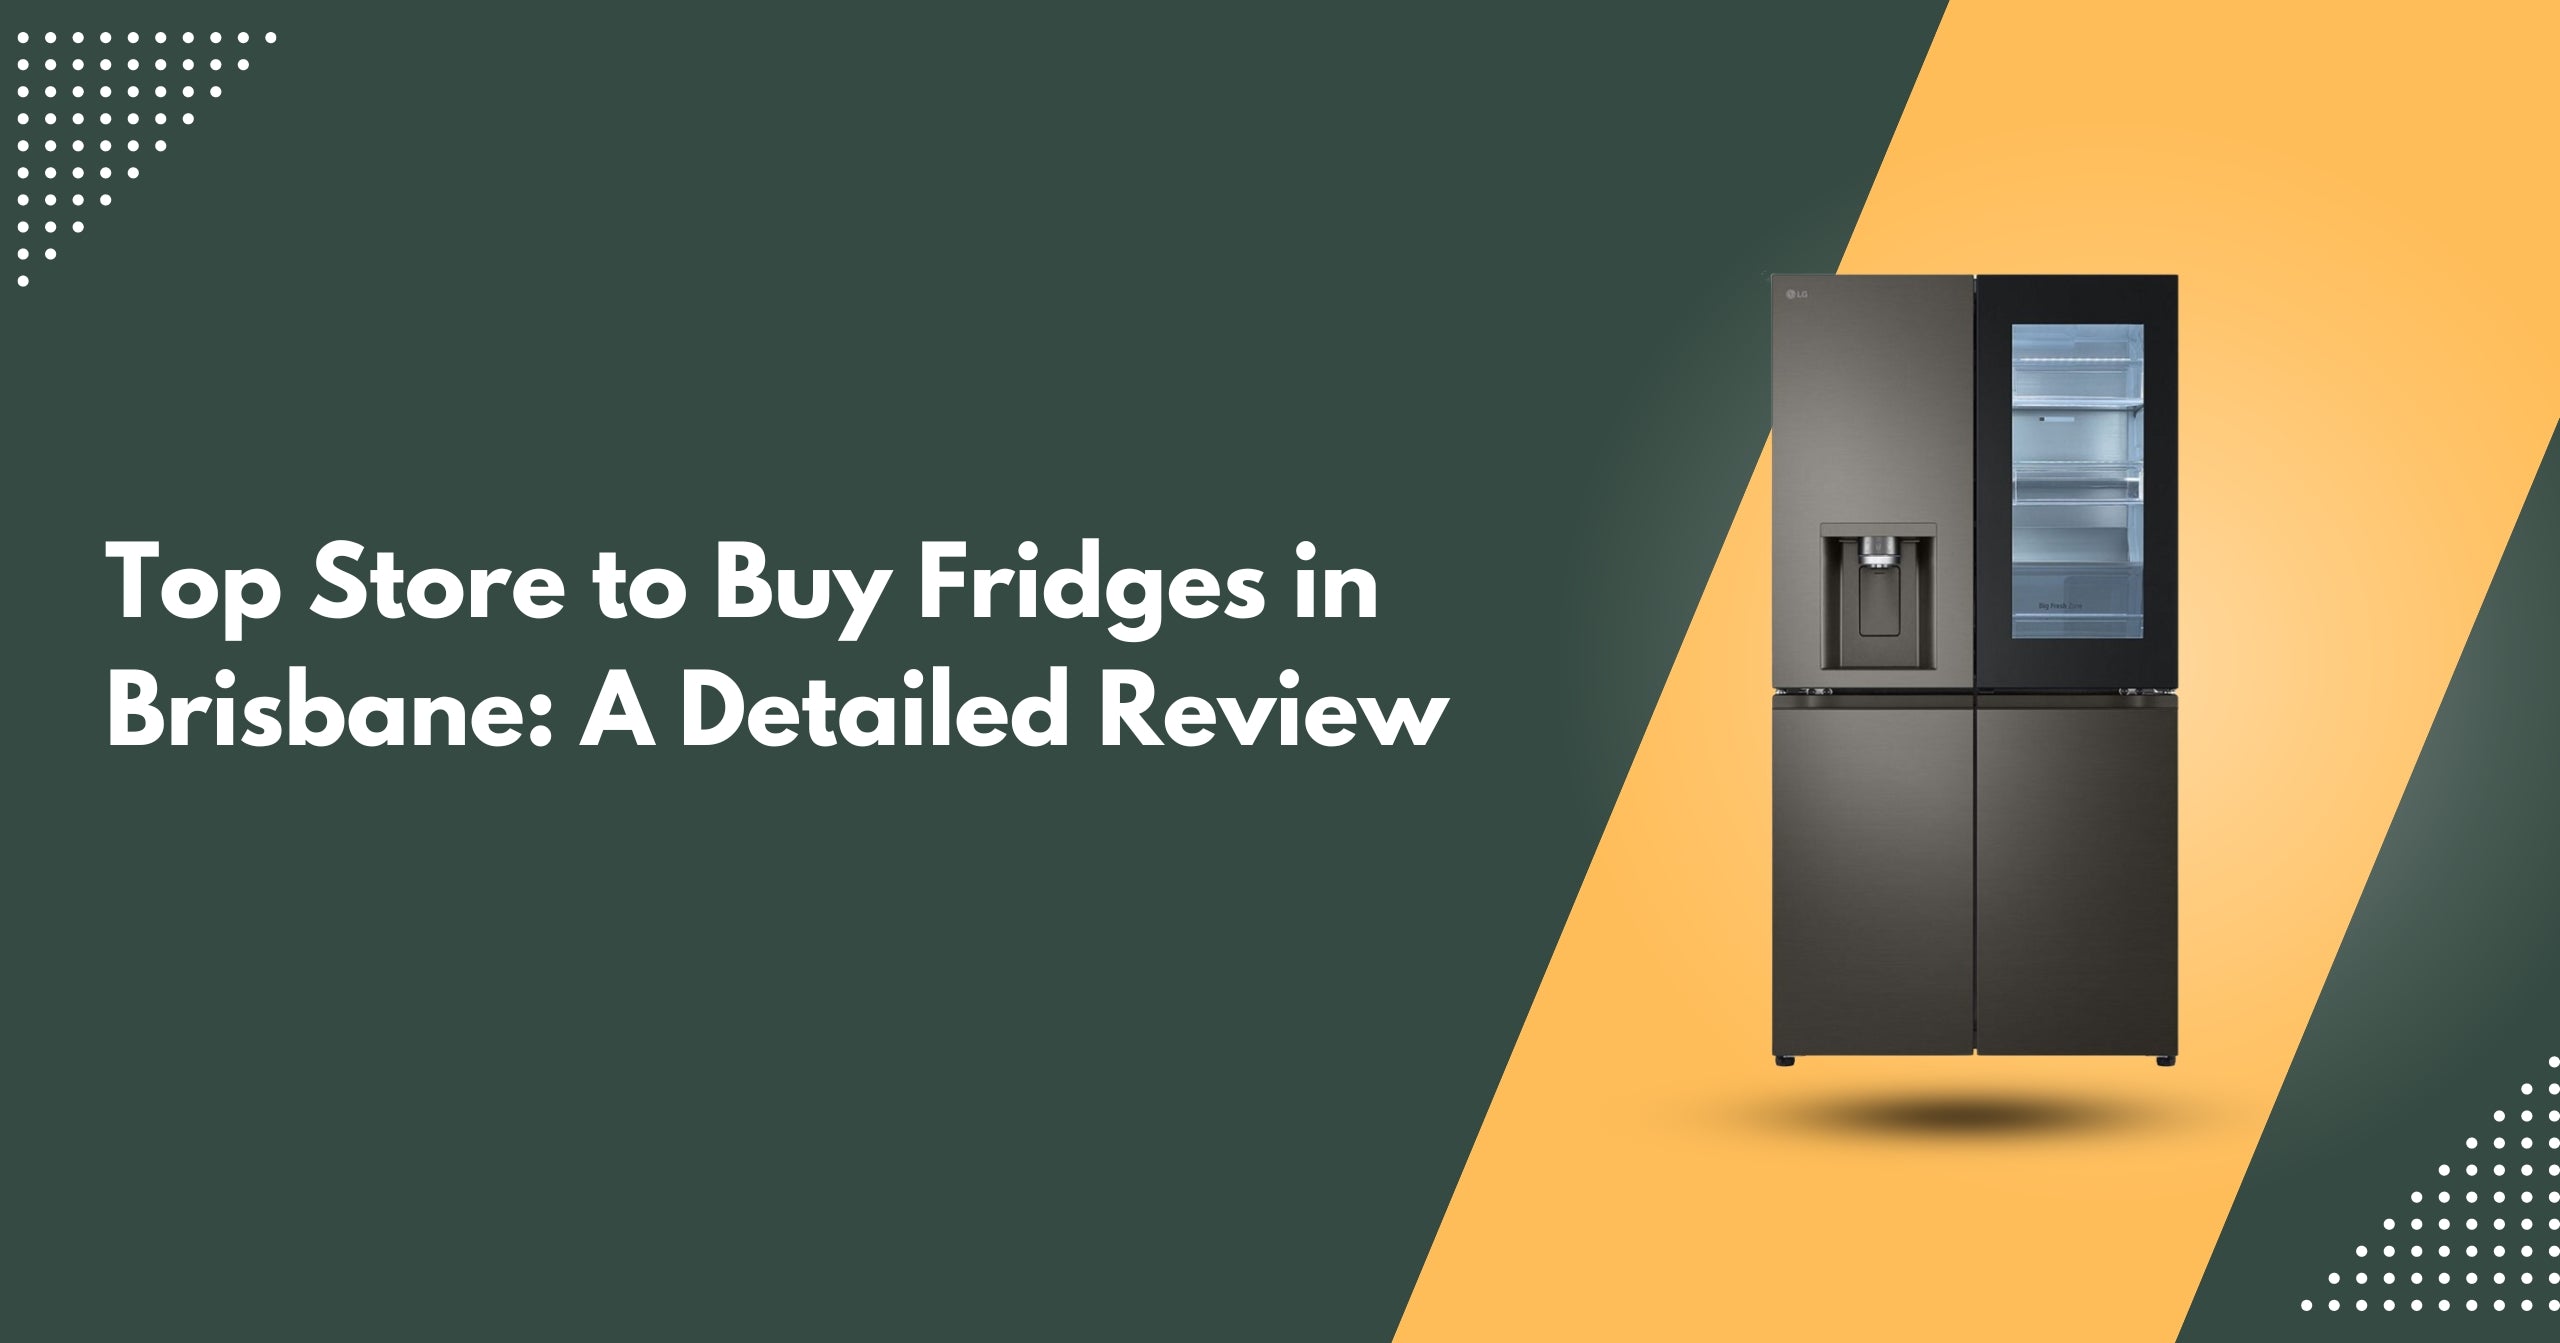 Top Store to Buy Fridges in Brisbane: A Detailed Review